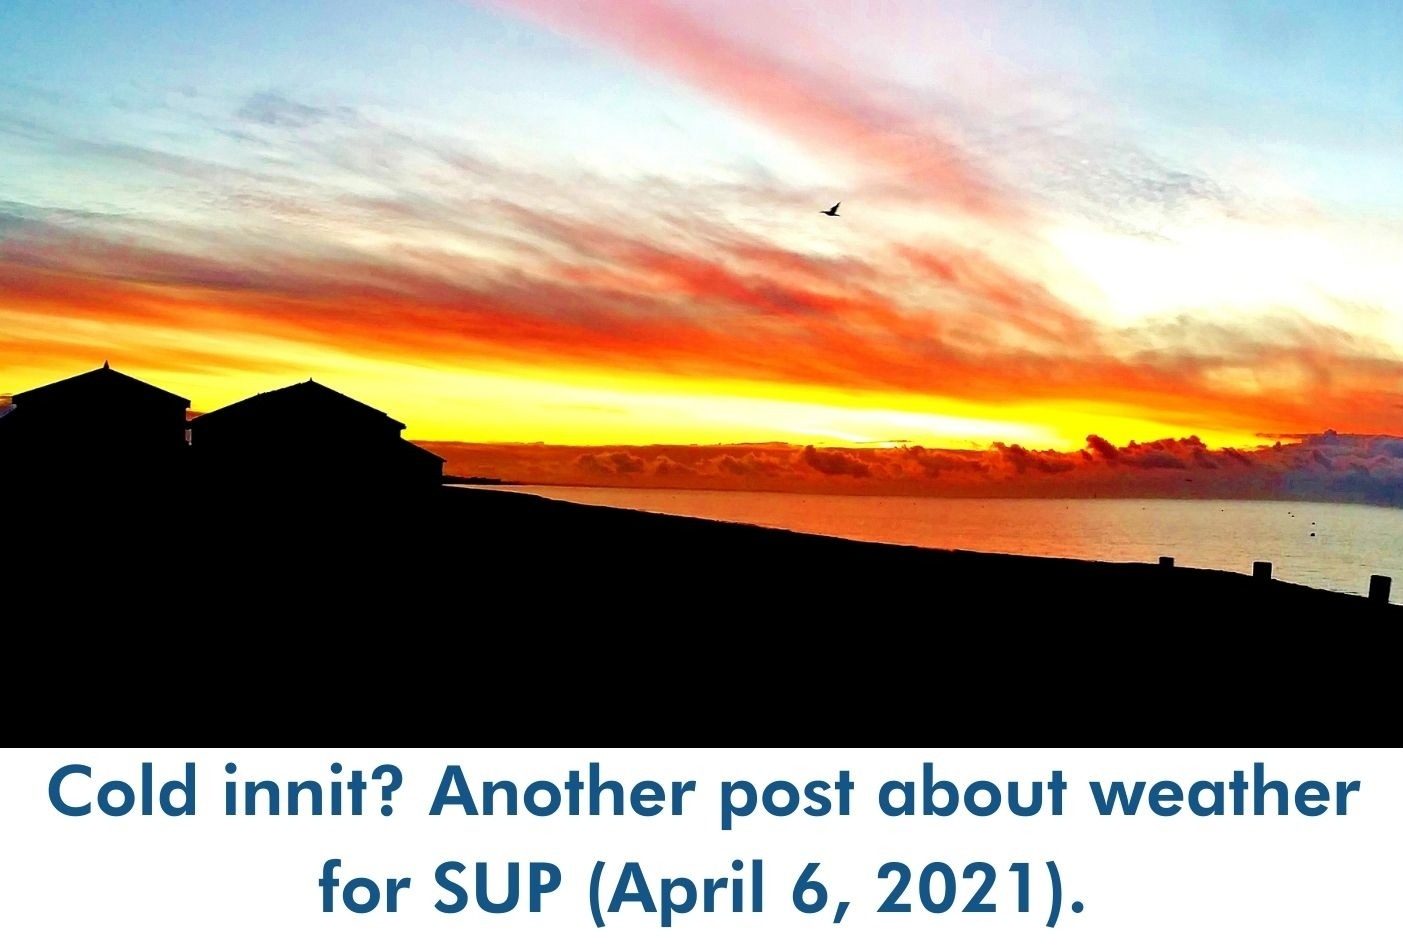 You are currently viewing Cold innit? Another post about weather for SUP (April 6, 2021).